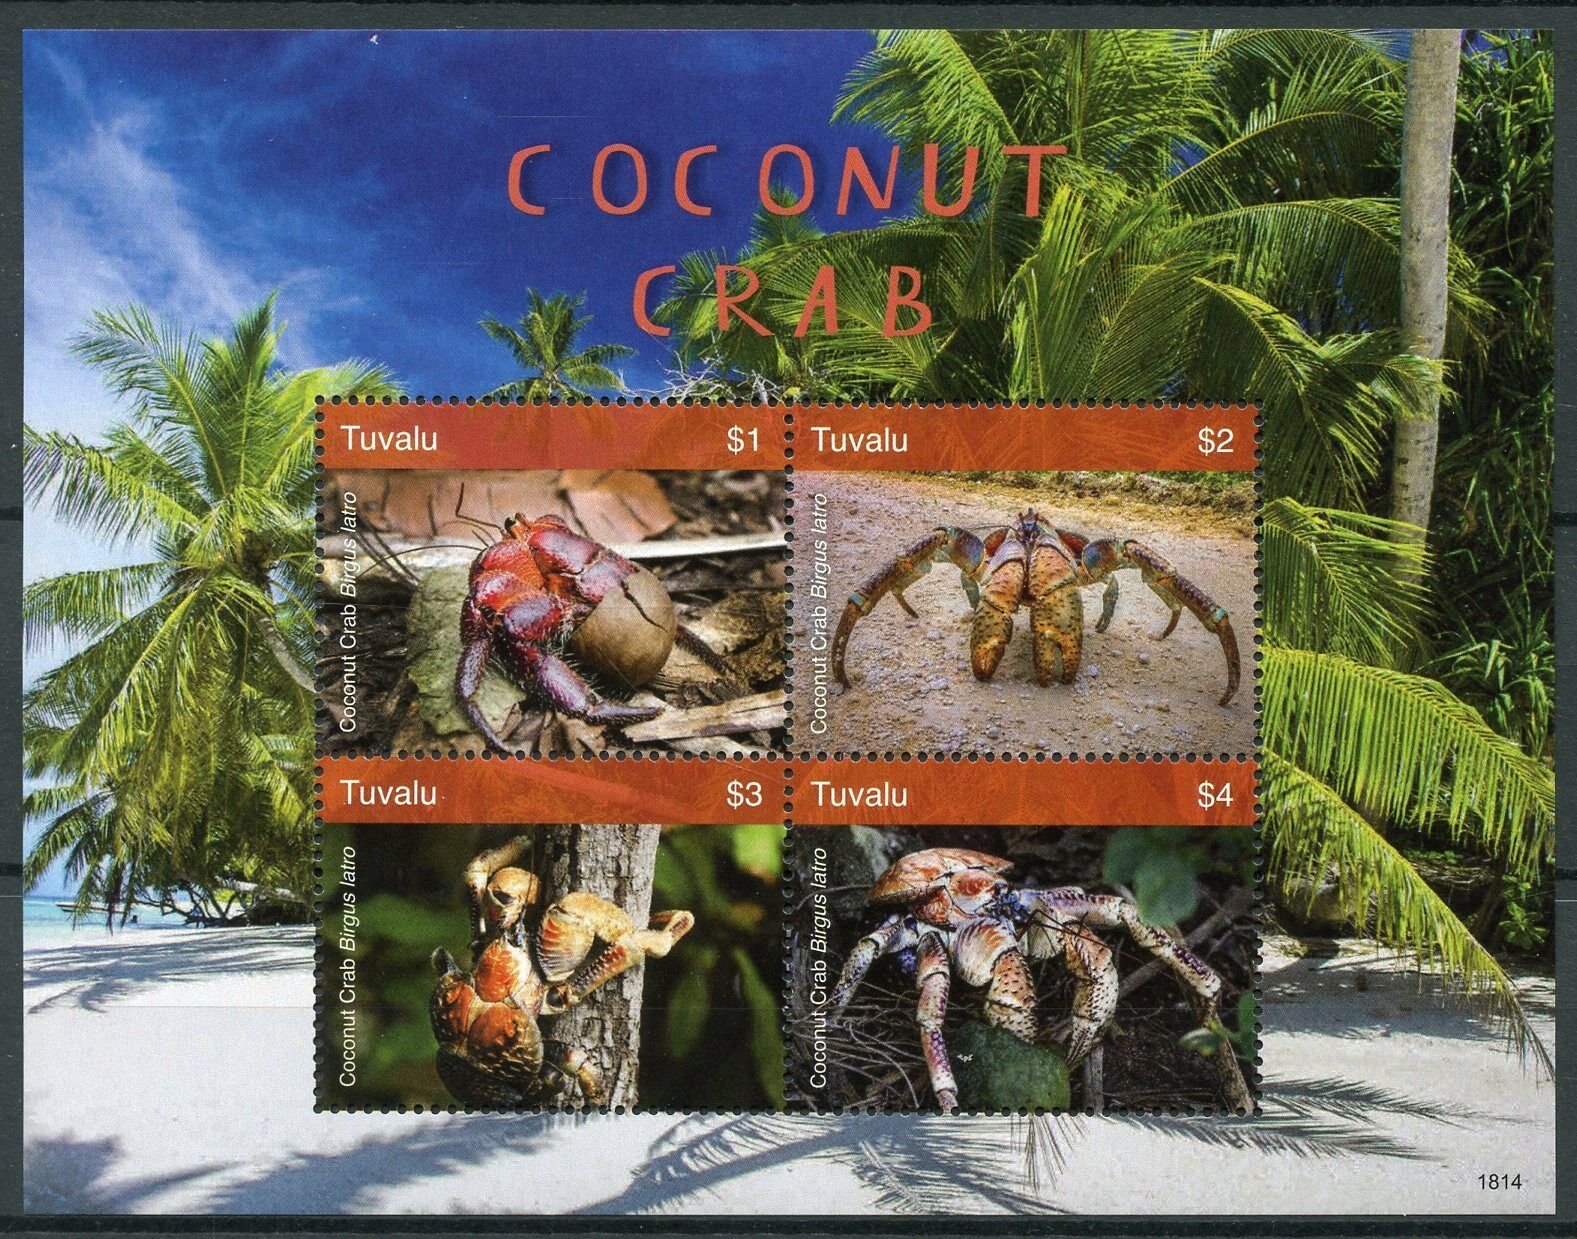 Tuvalu 2018 MNH Marine Animals Stamps Coconut Crab Palm Trees Crabs Crustaceans 4v M/S